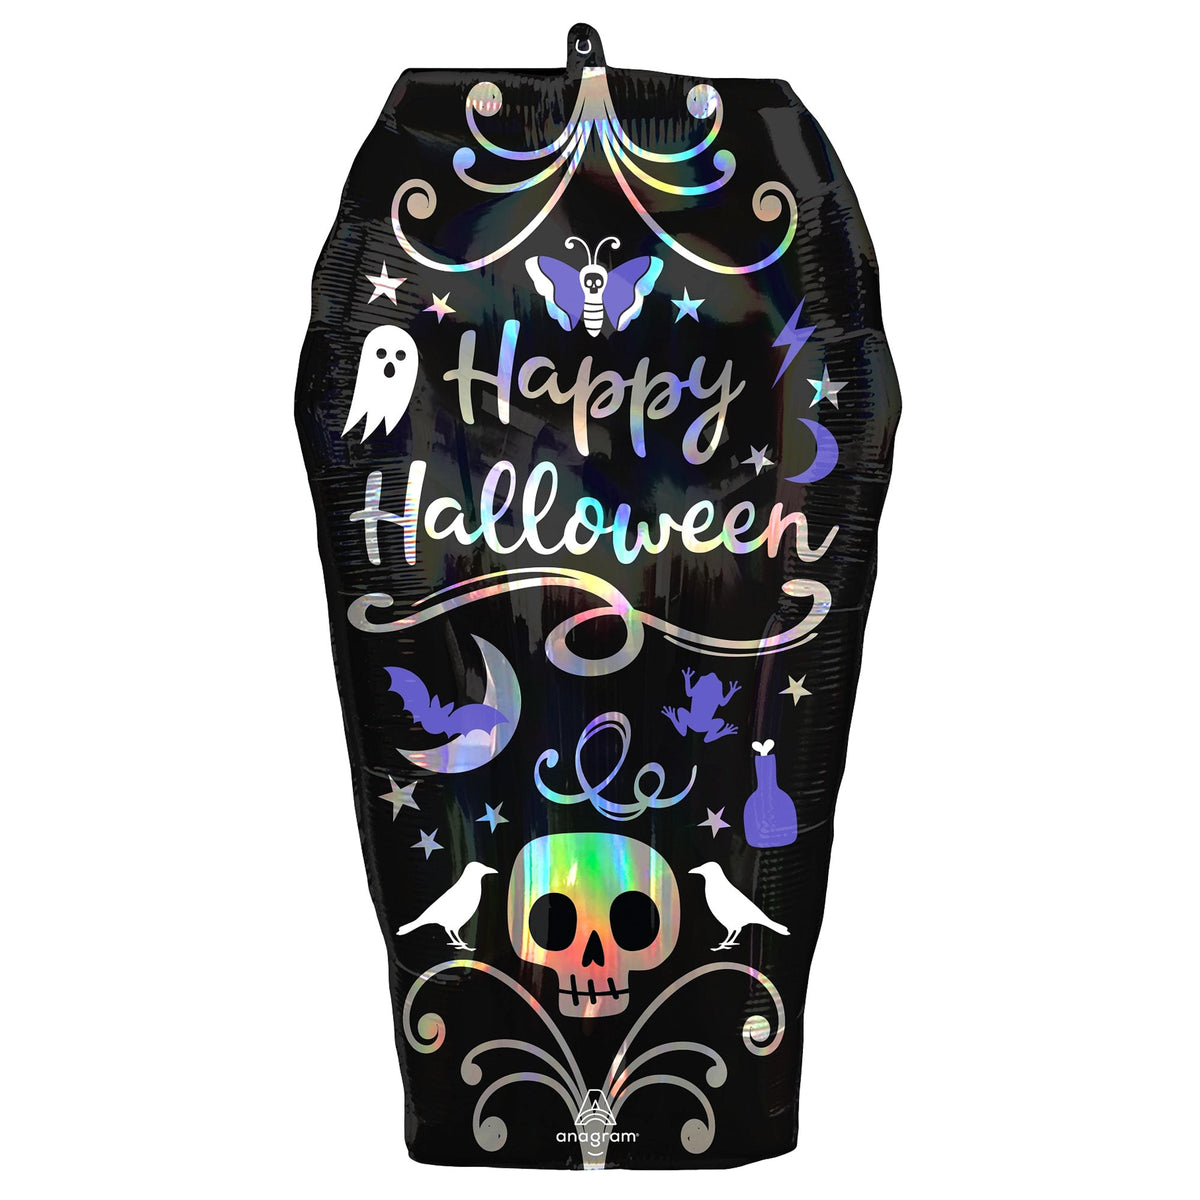 LE GROUPE BLC INTL INC Balloons Halloween Iridescent Coffin Supershape Foil Balloon, "Happy Halloween", 15 x 27 Inches 026635431620